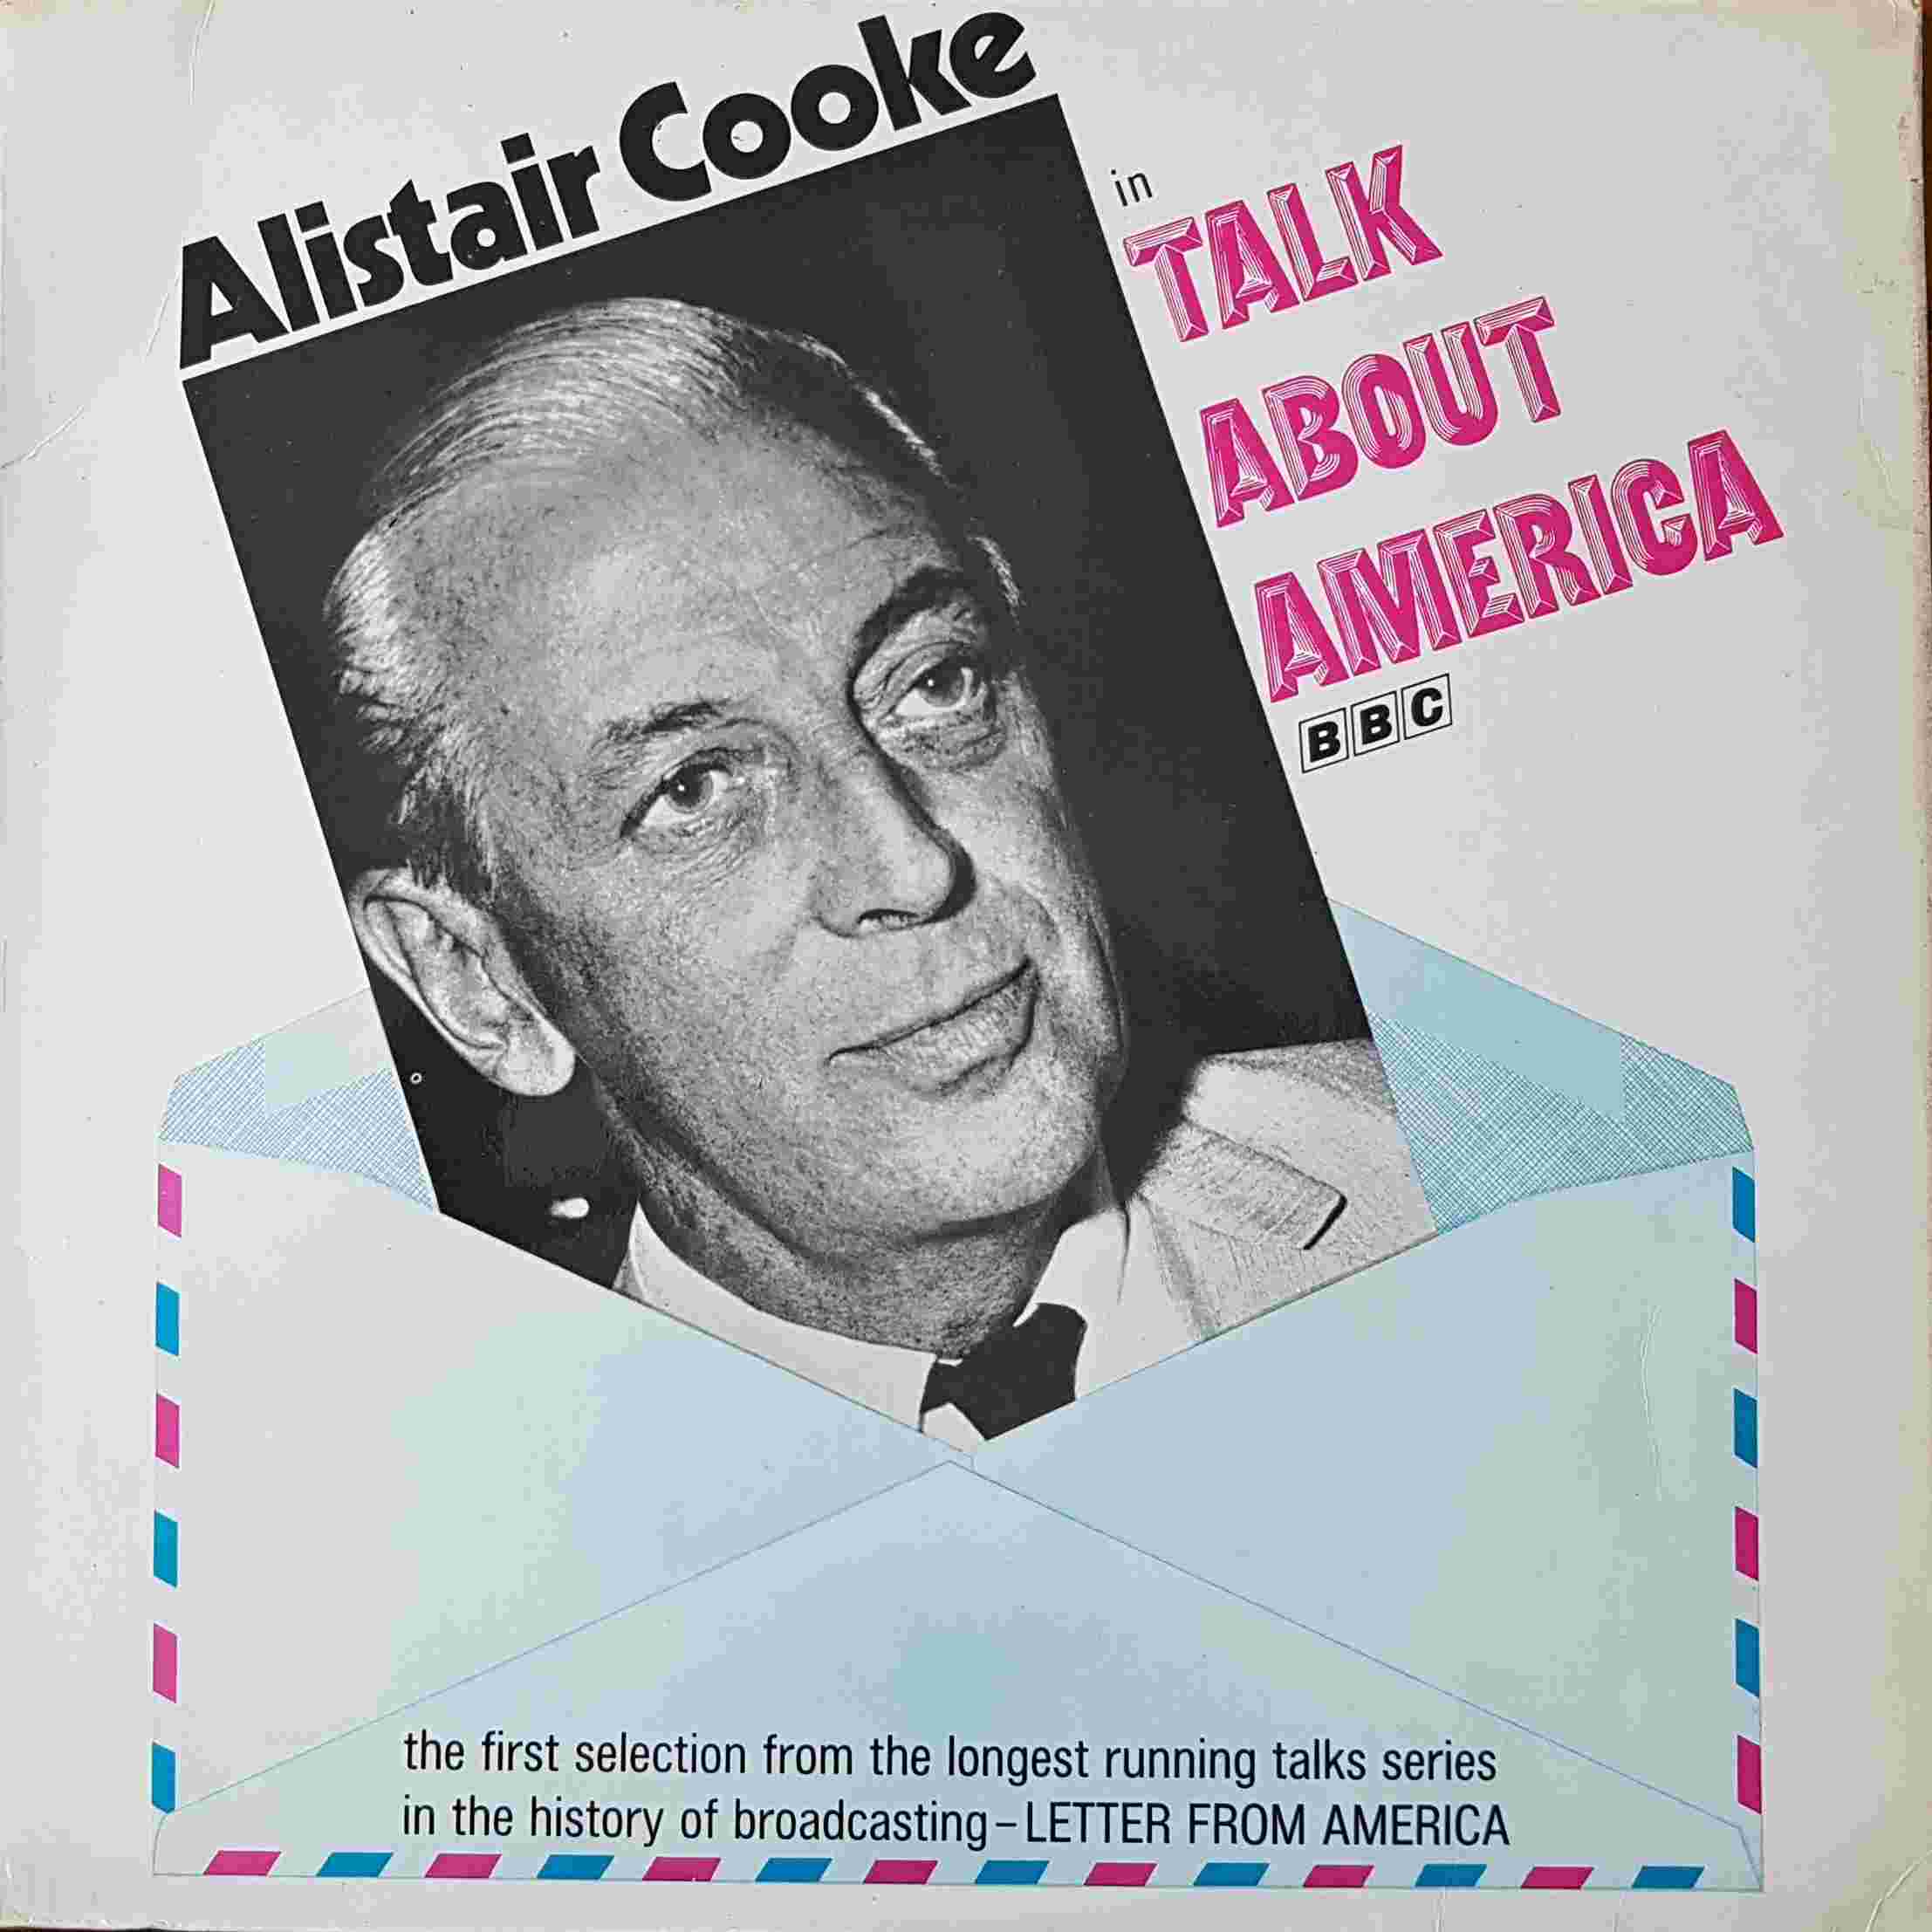 Picture of REC 70 Talk about America by artist Alistair Cooke from the BBC albums - Records and Tapes library